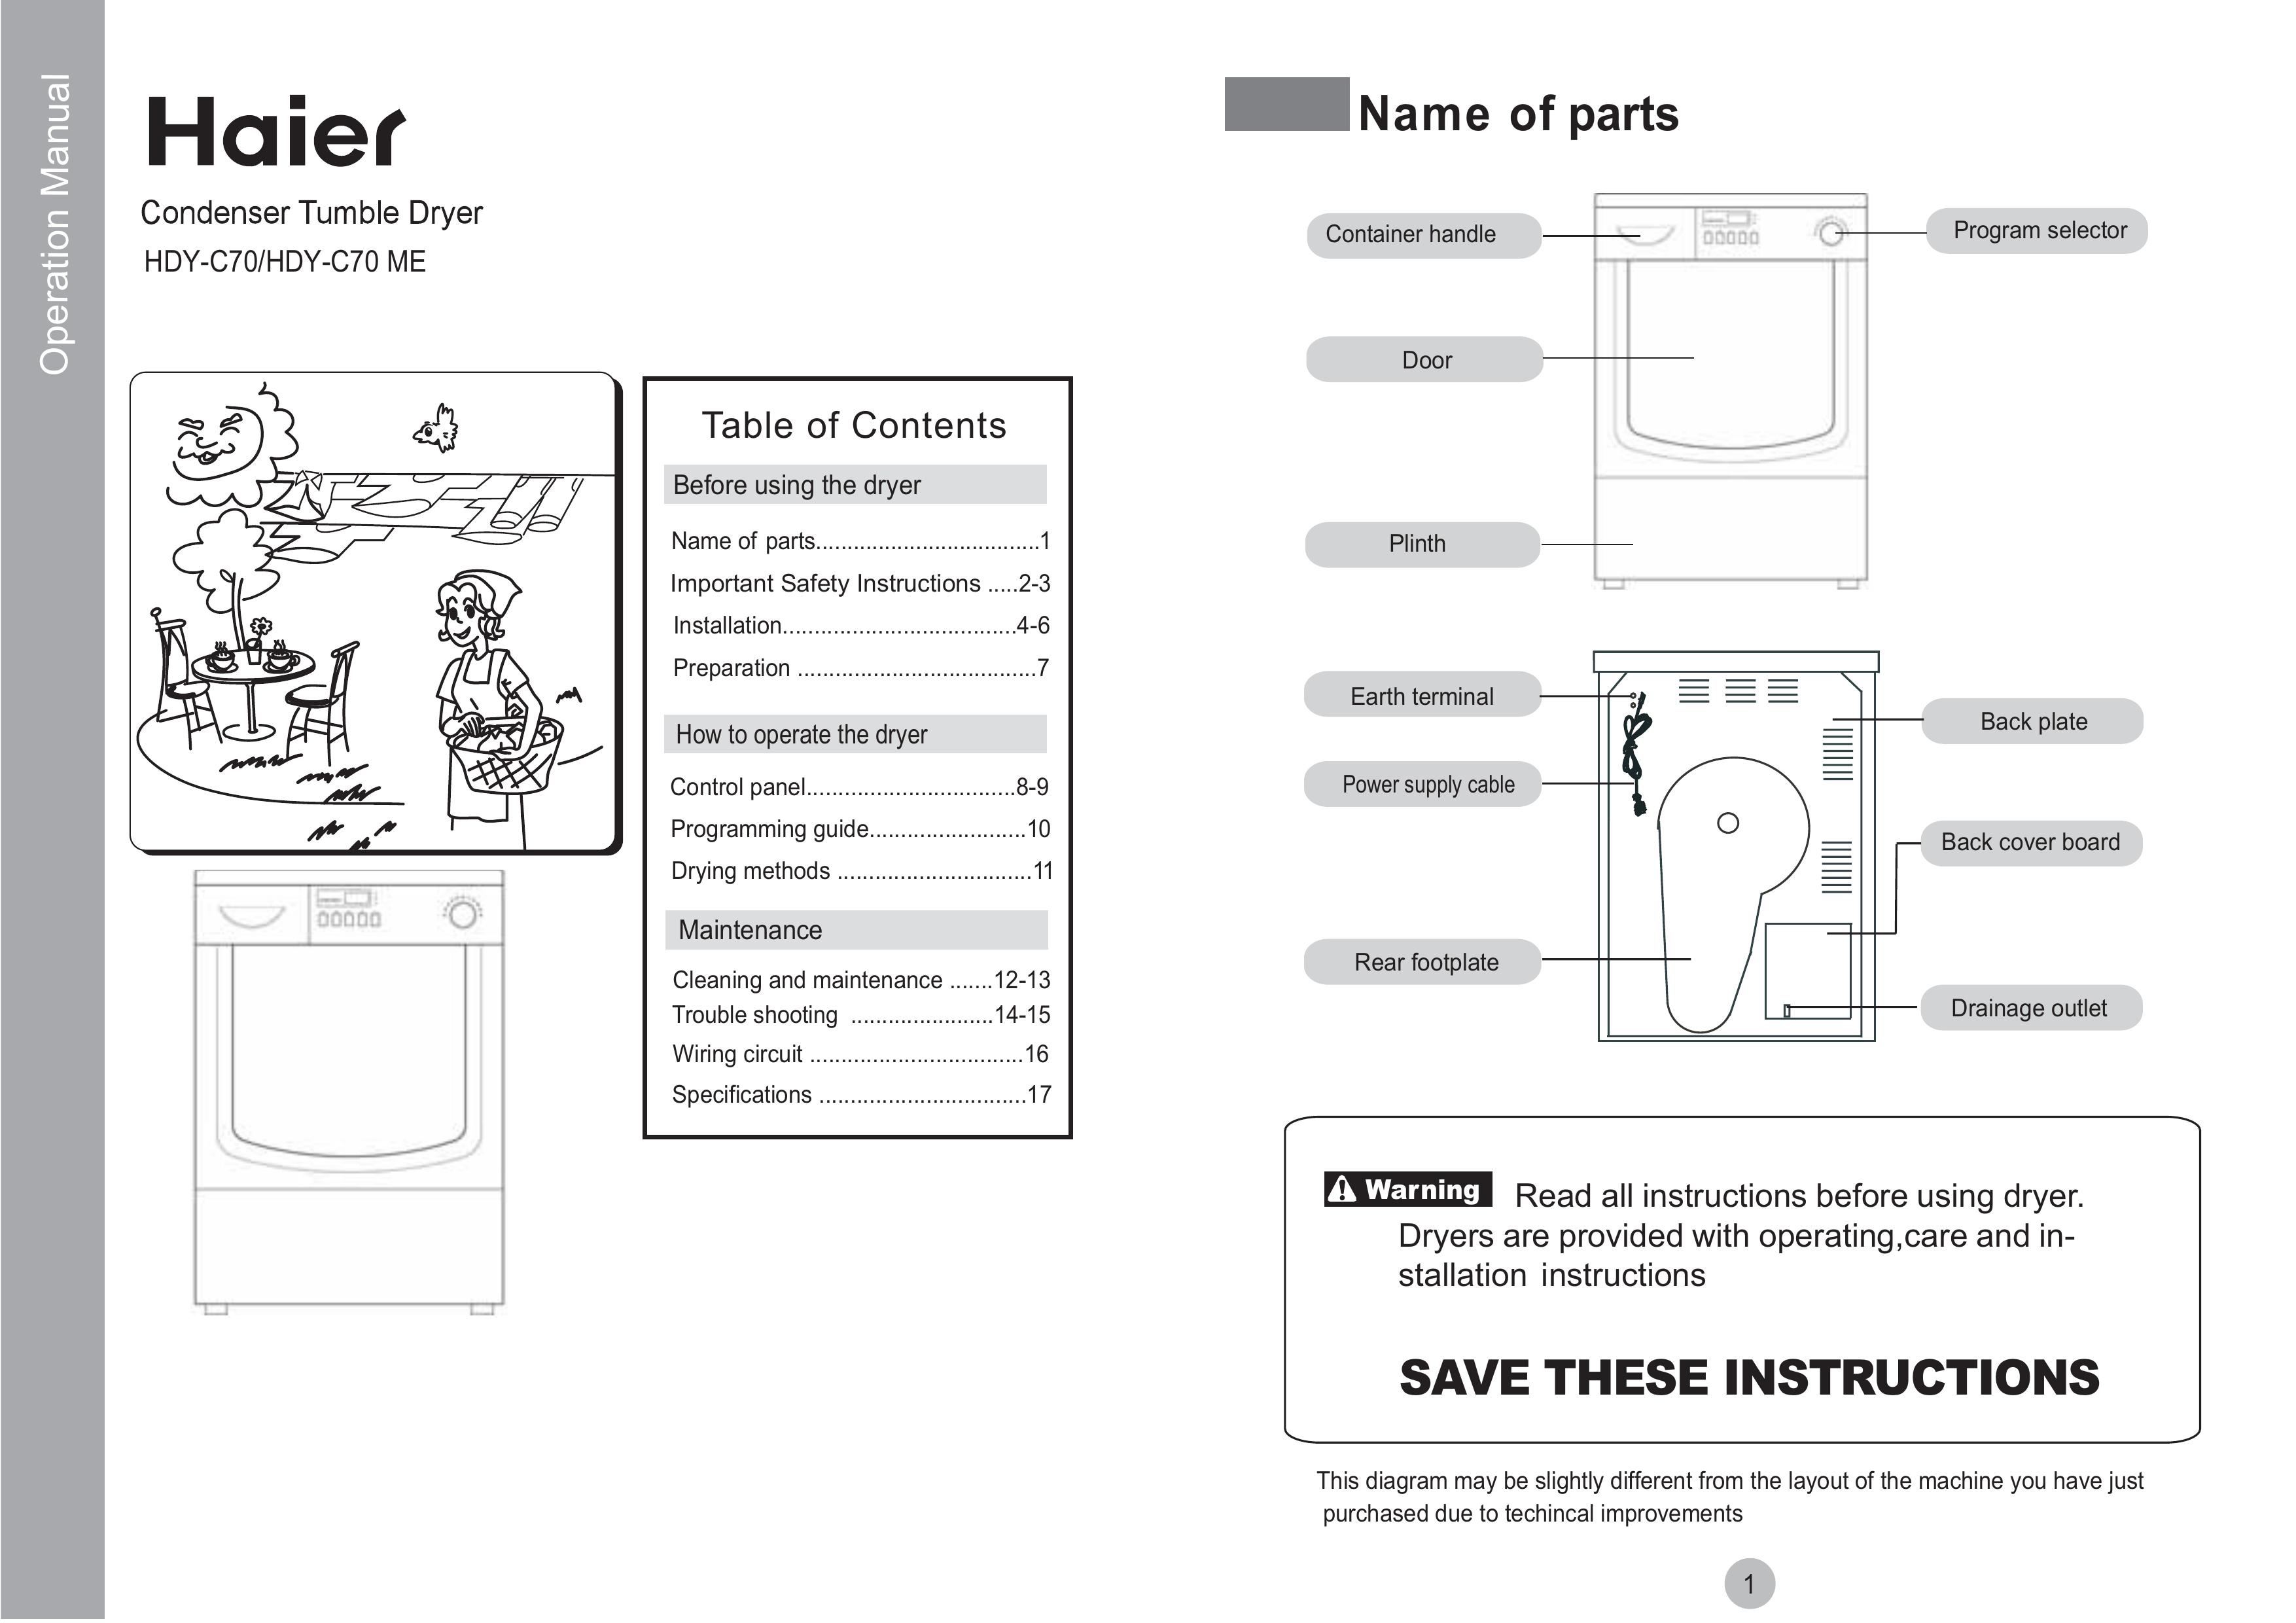 Haier HDY-C70 Clothes Dryer User Manual